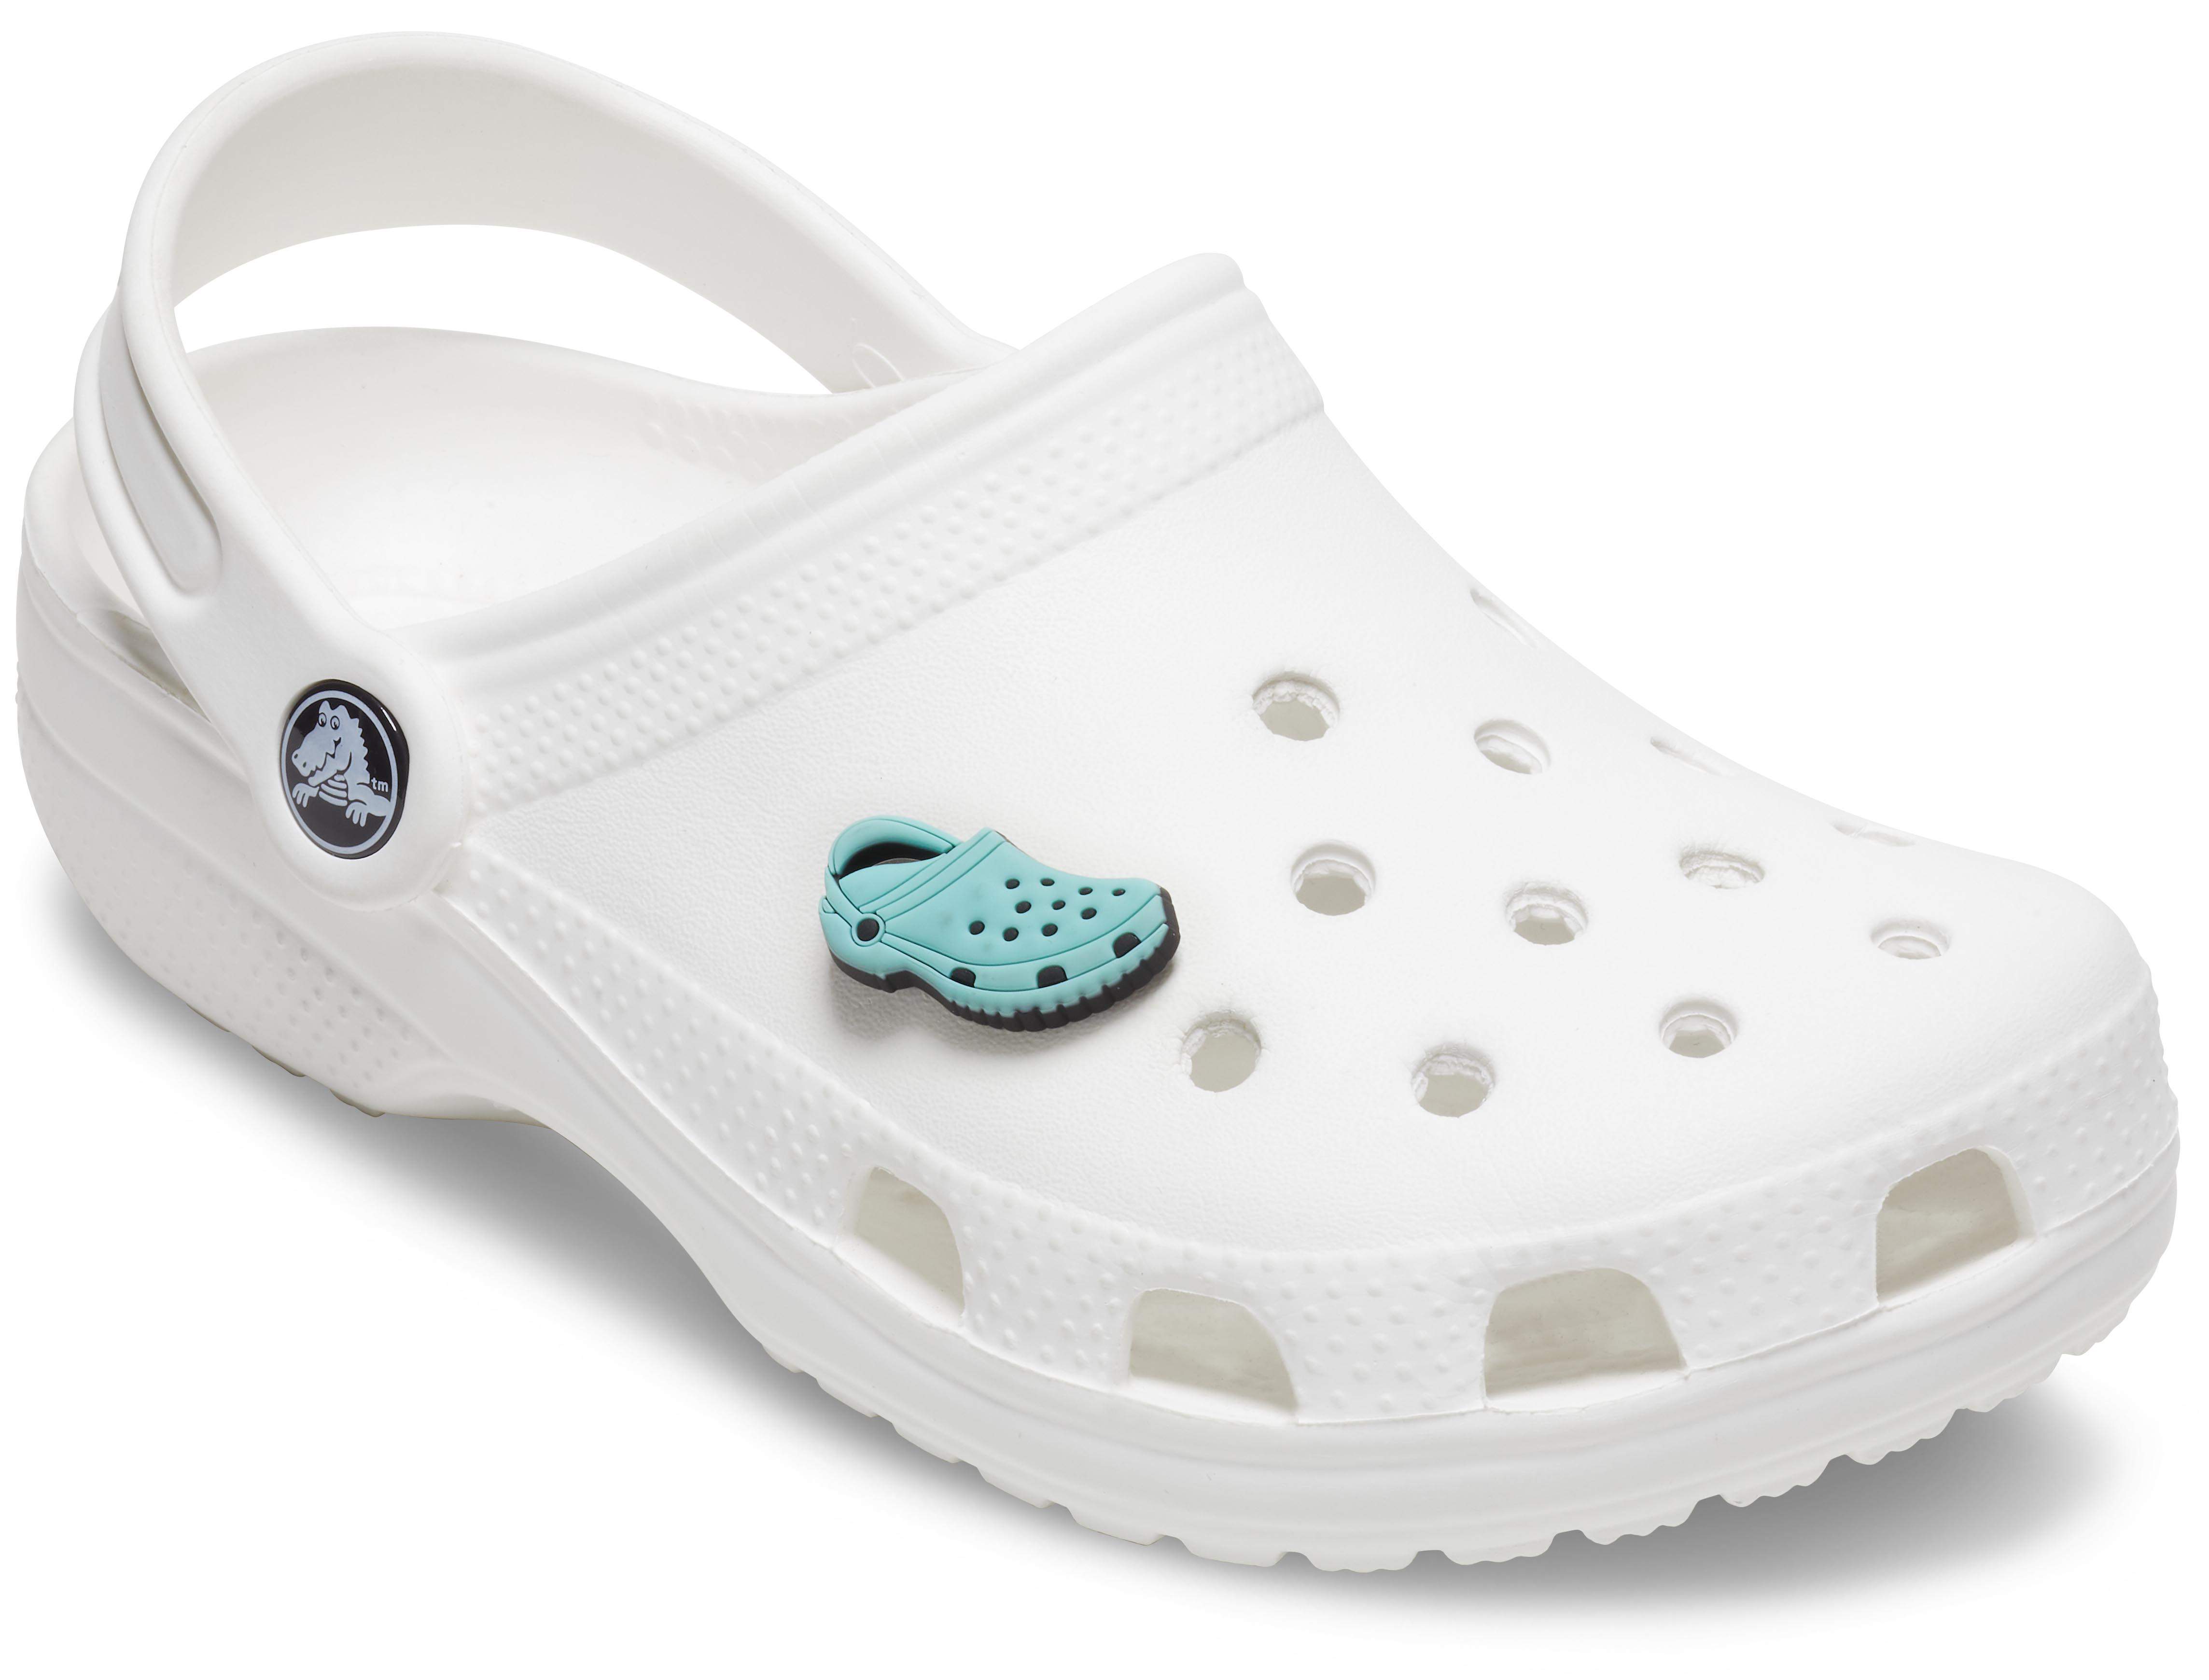 blue crocs with charms